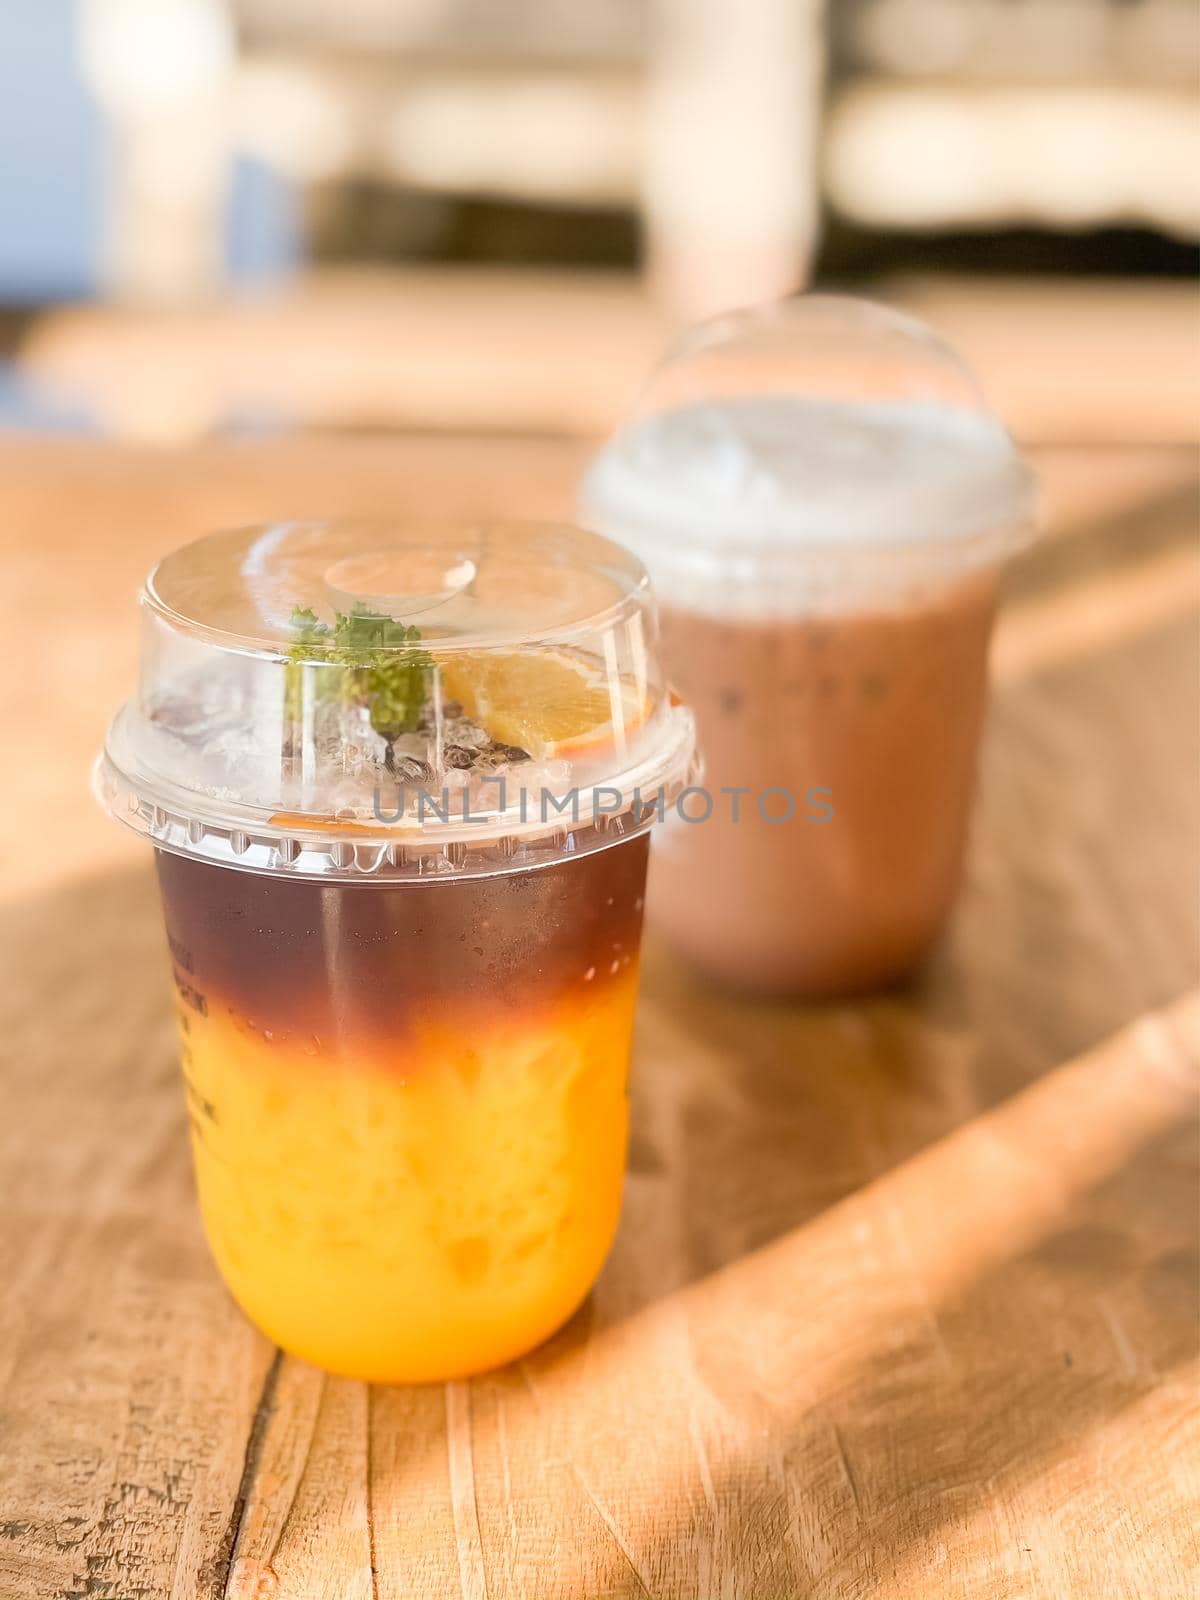 A glass of iced americano with orange juice by punsayaporn